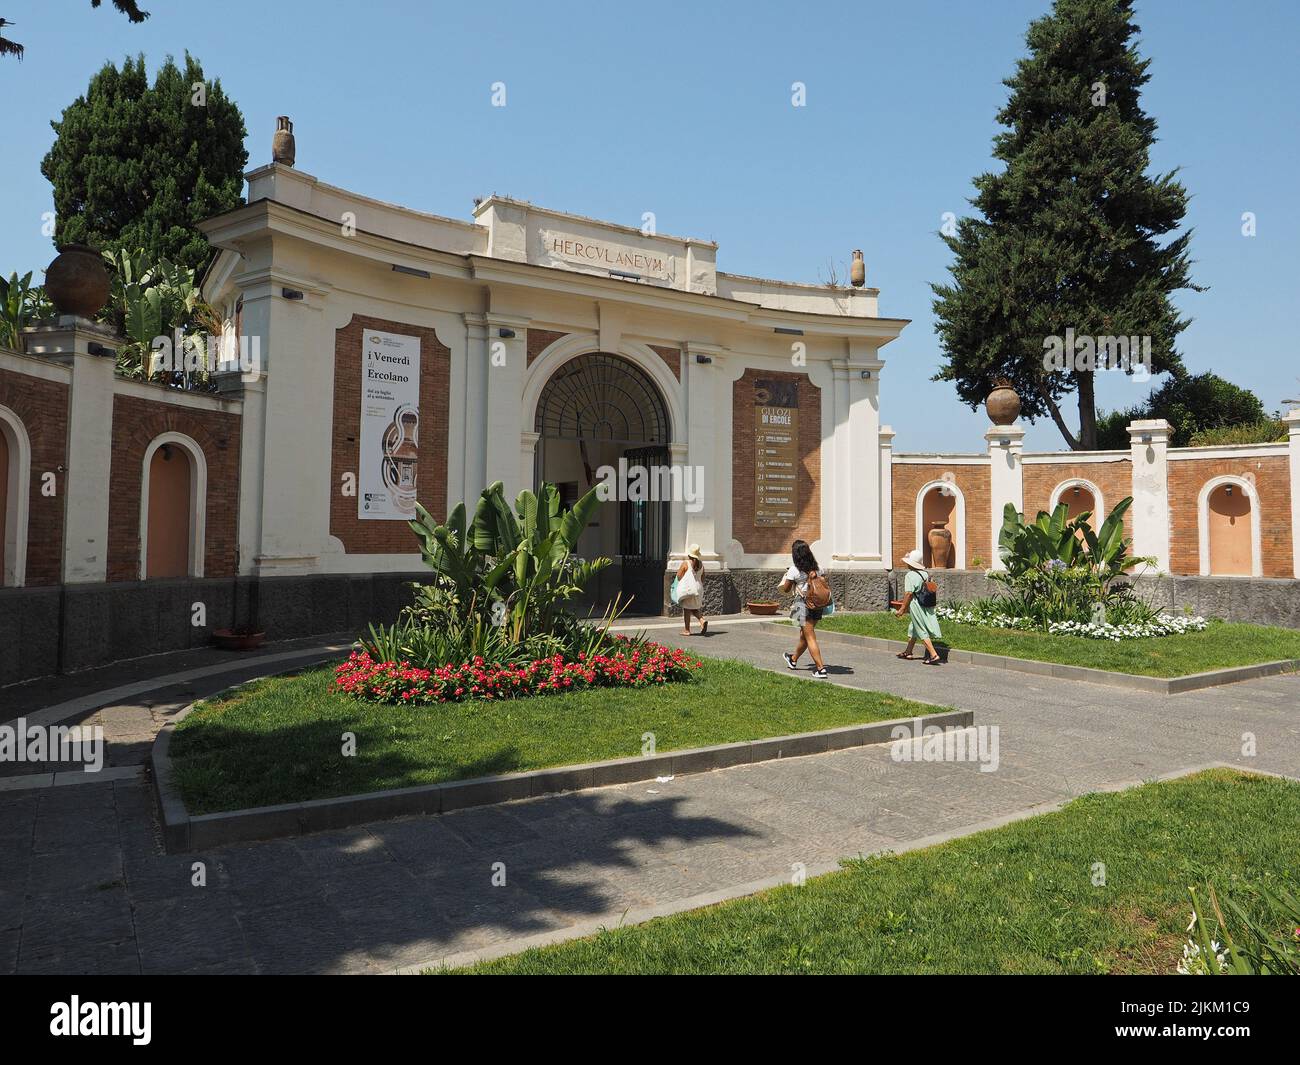 Entrance to the Herculaneum excavation site in. Ercolano, Campania, Italy, with three tourists visiting the site Stock Photo